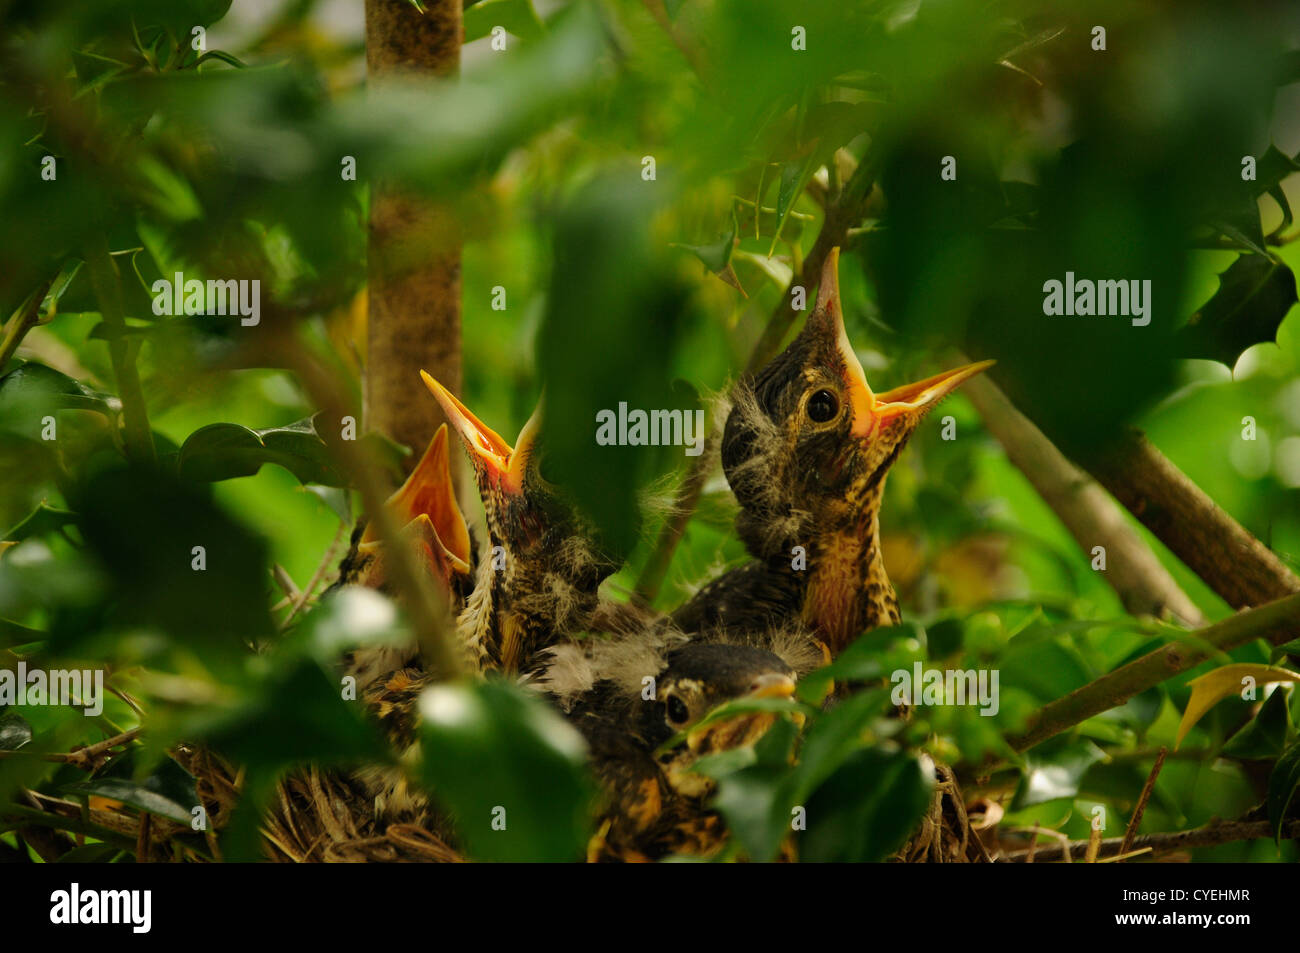 Baby birds calling from nest in a tree branch Stock Photo